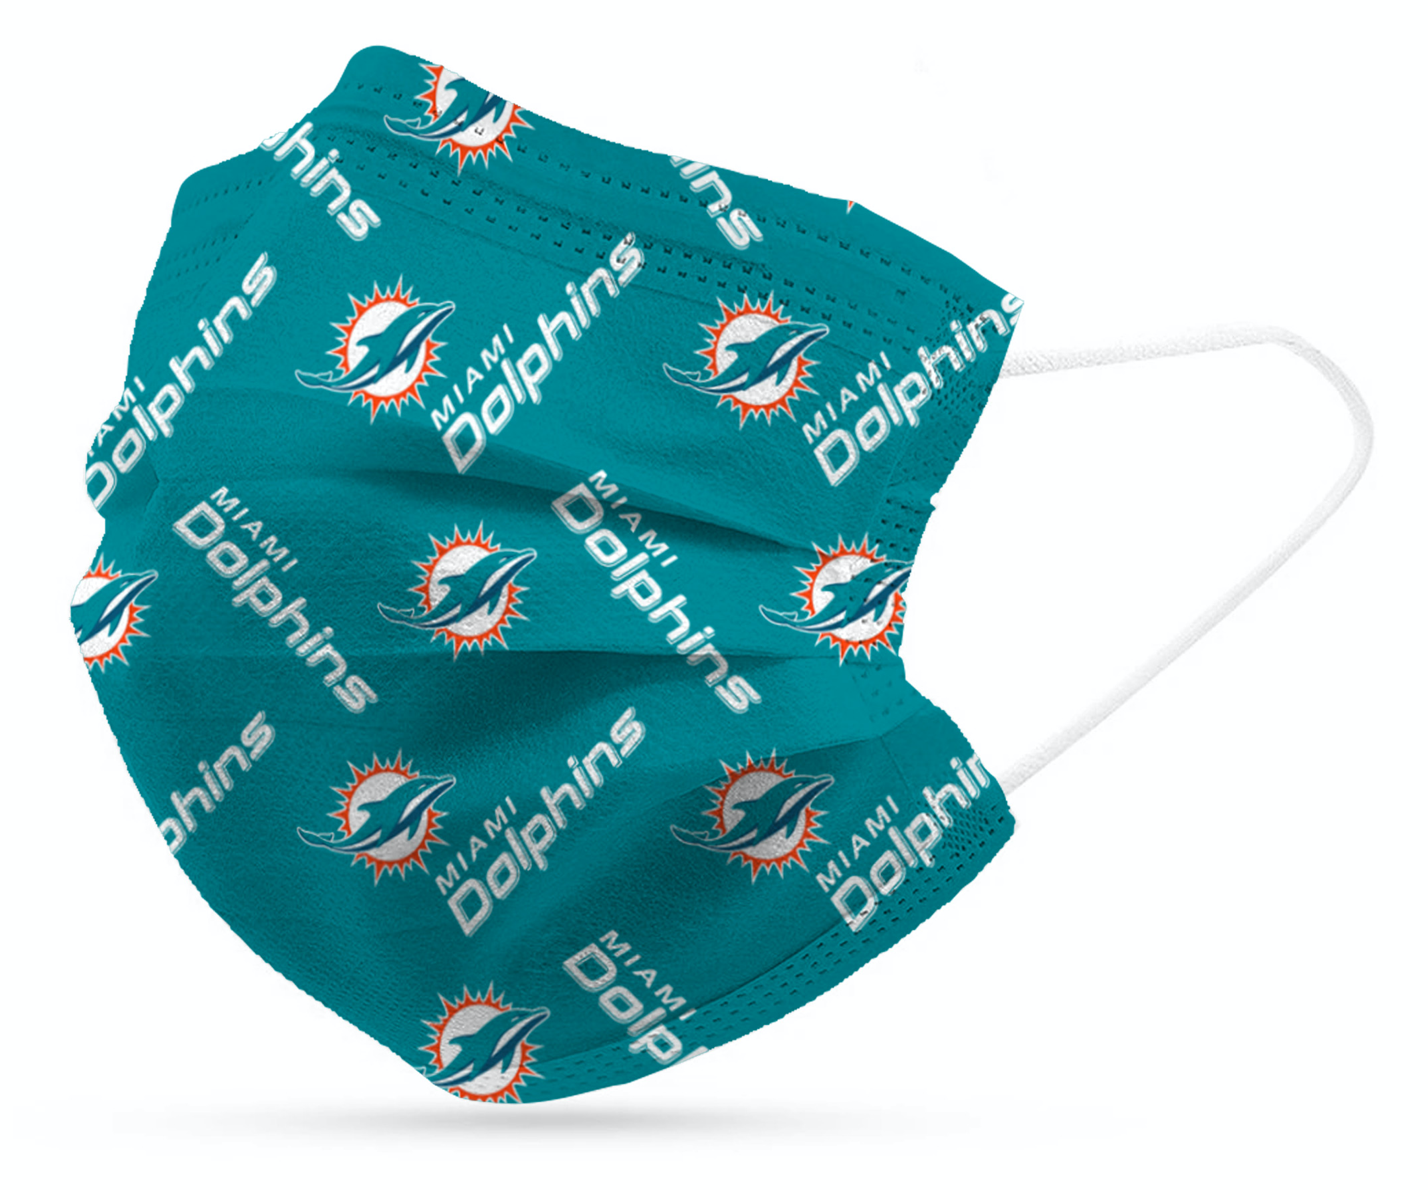 Miami Dolphins Three Layer Disposable Face Masks - 6 pack